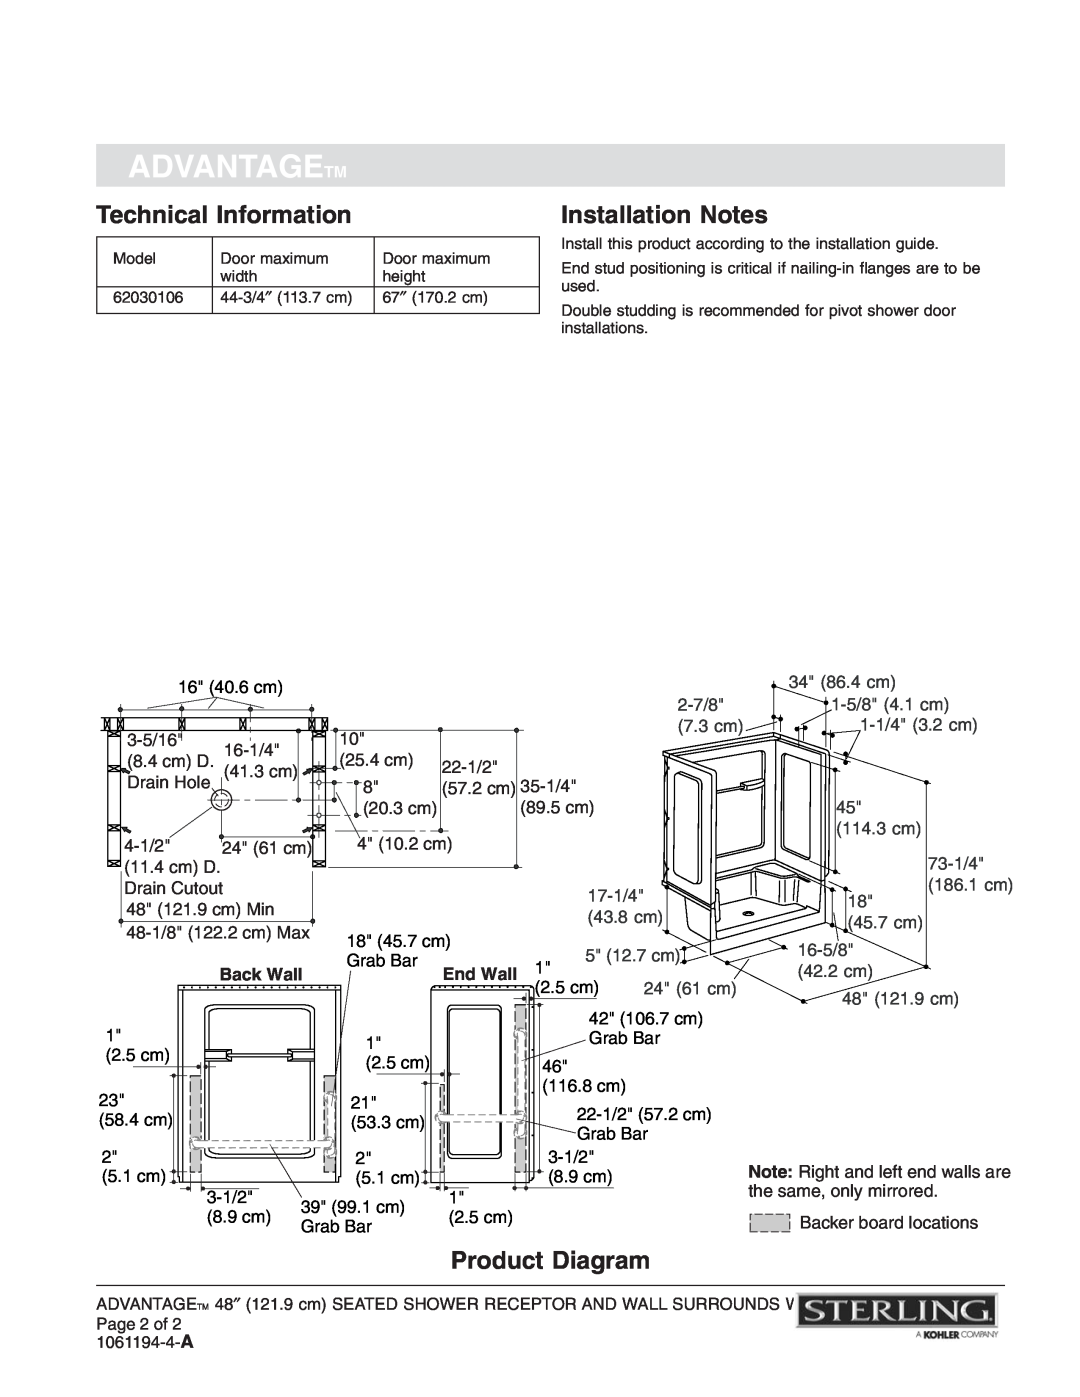 Sterling Plumbing 62034106 Technical Information, Installation Notes, Product Diagram, Advantagetm, 2-7/8, 7.3 cm, 17-1/4 